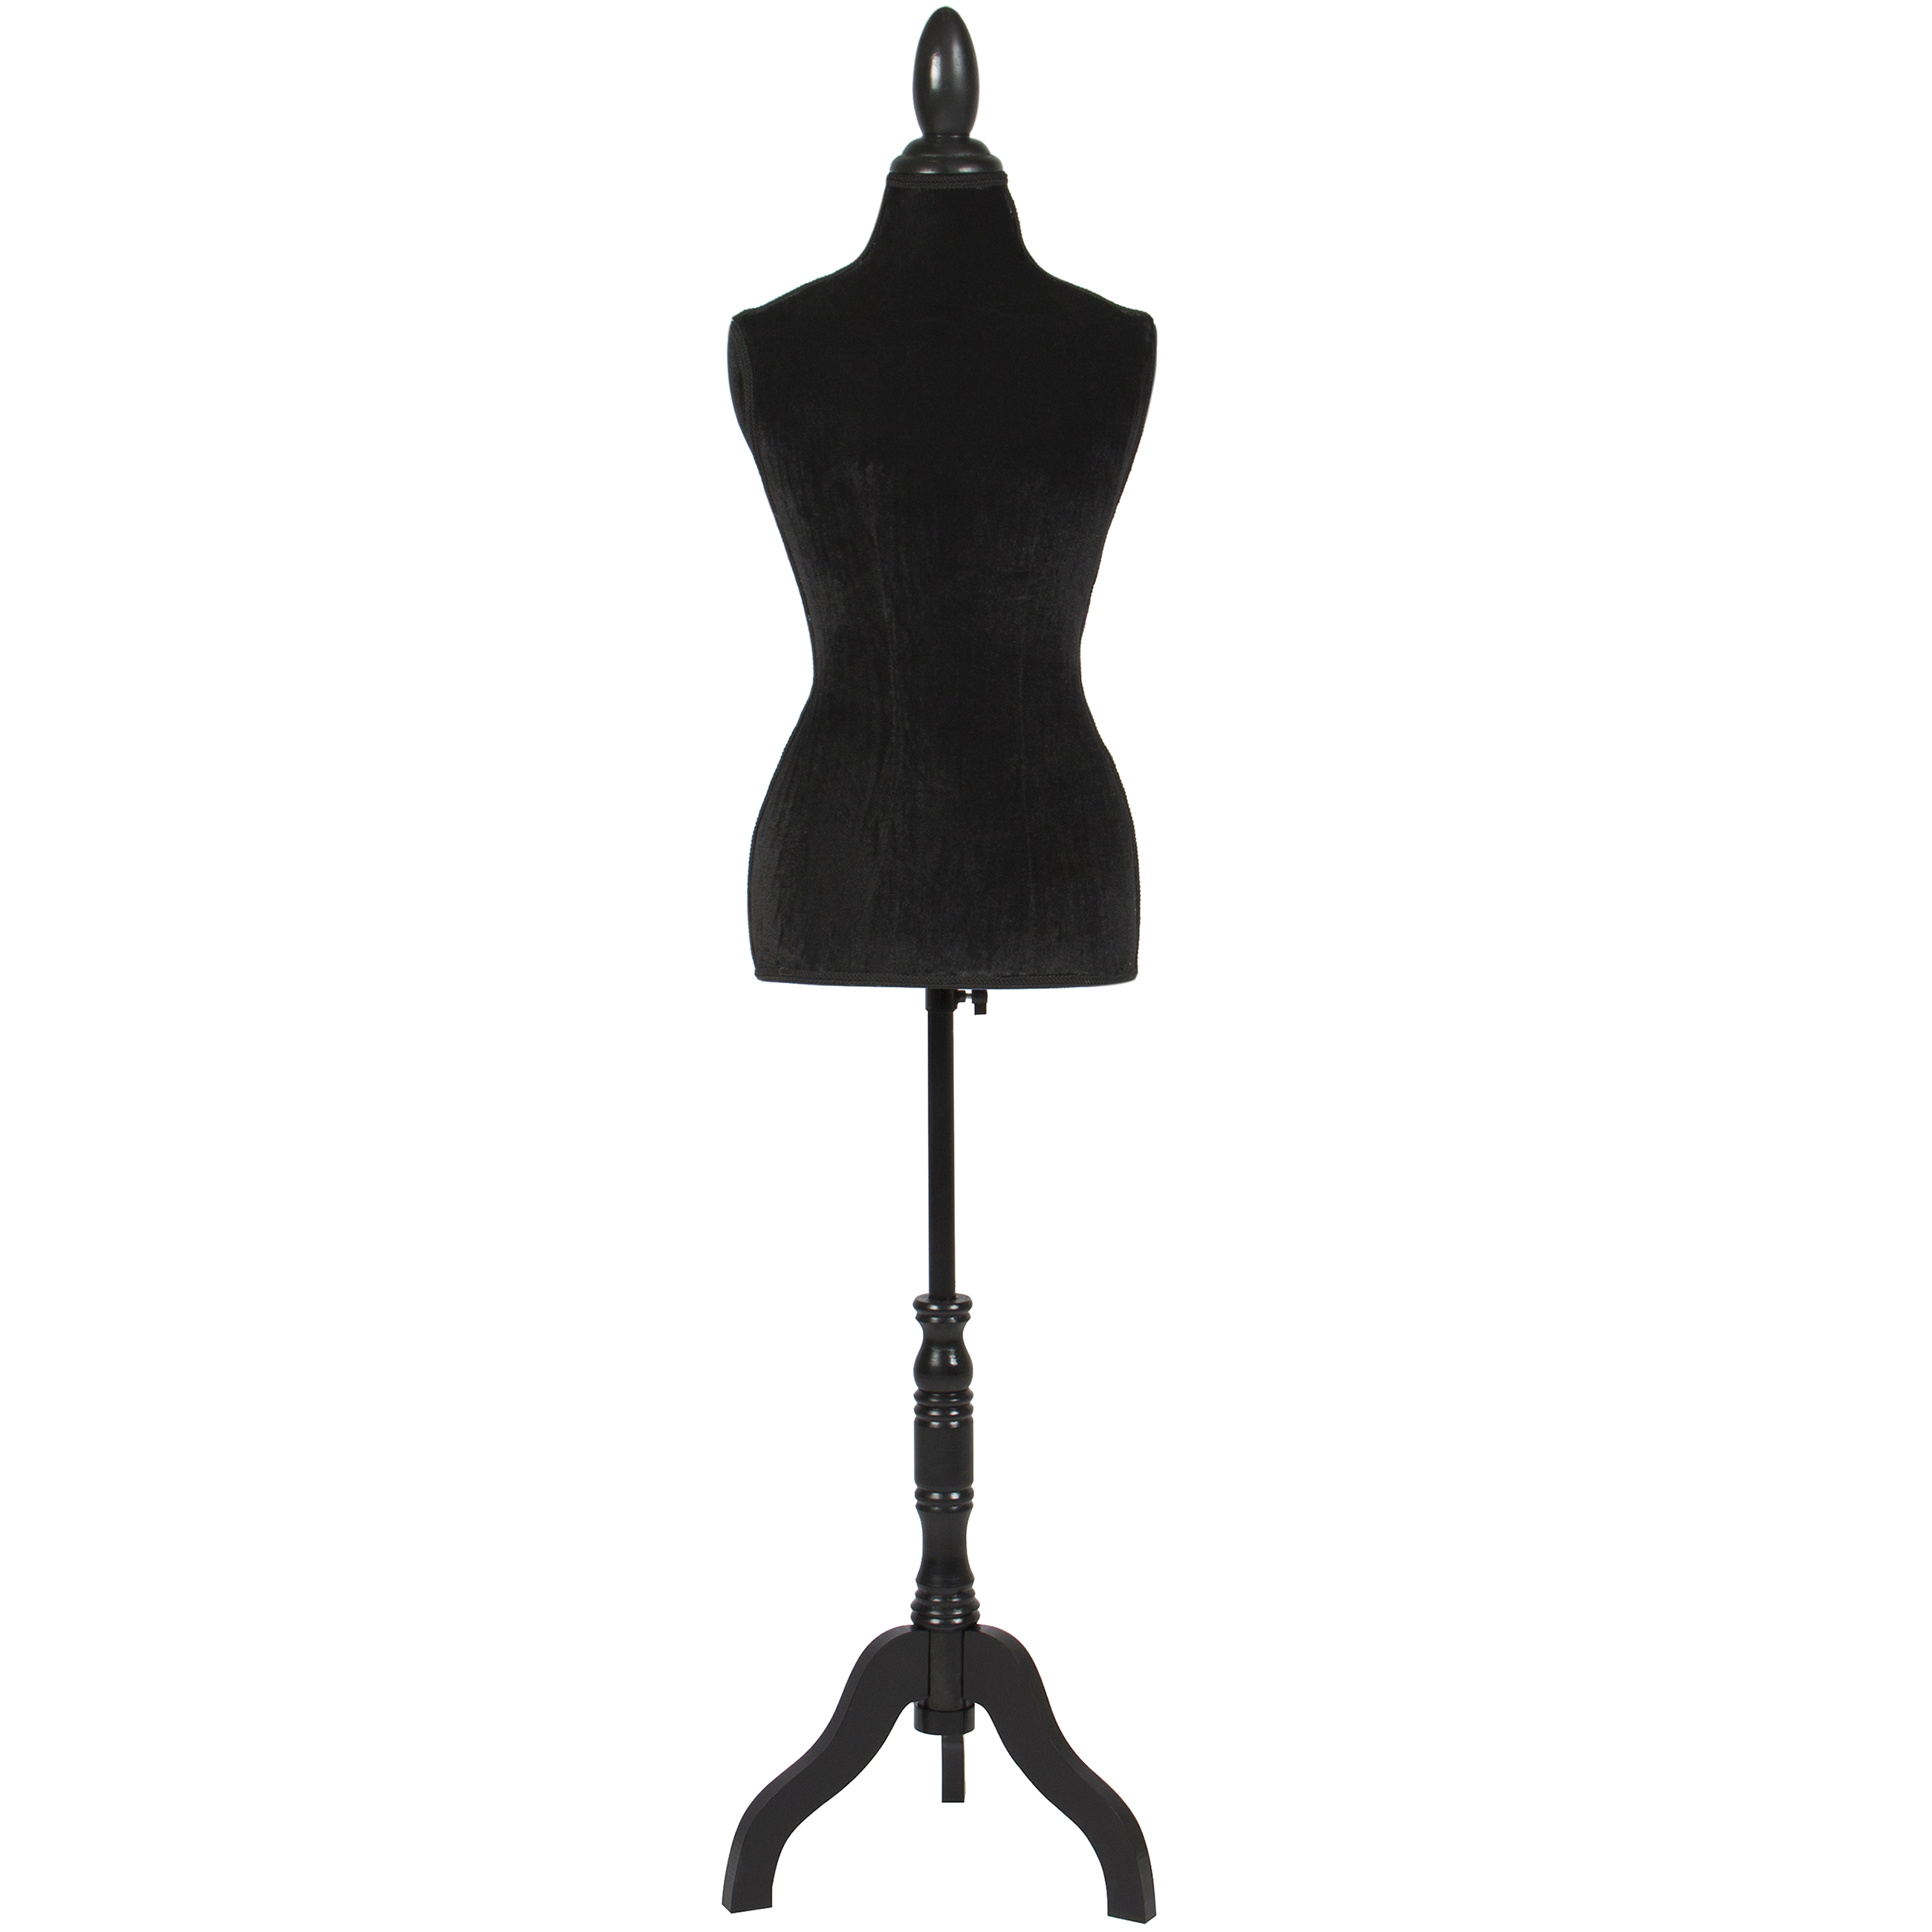 Best Choice Products Female Mannequin Torso Display w/ Wooden Tripod ...